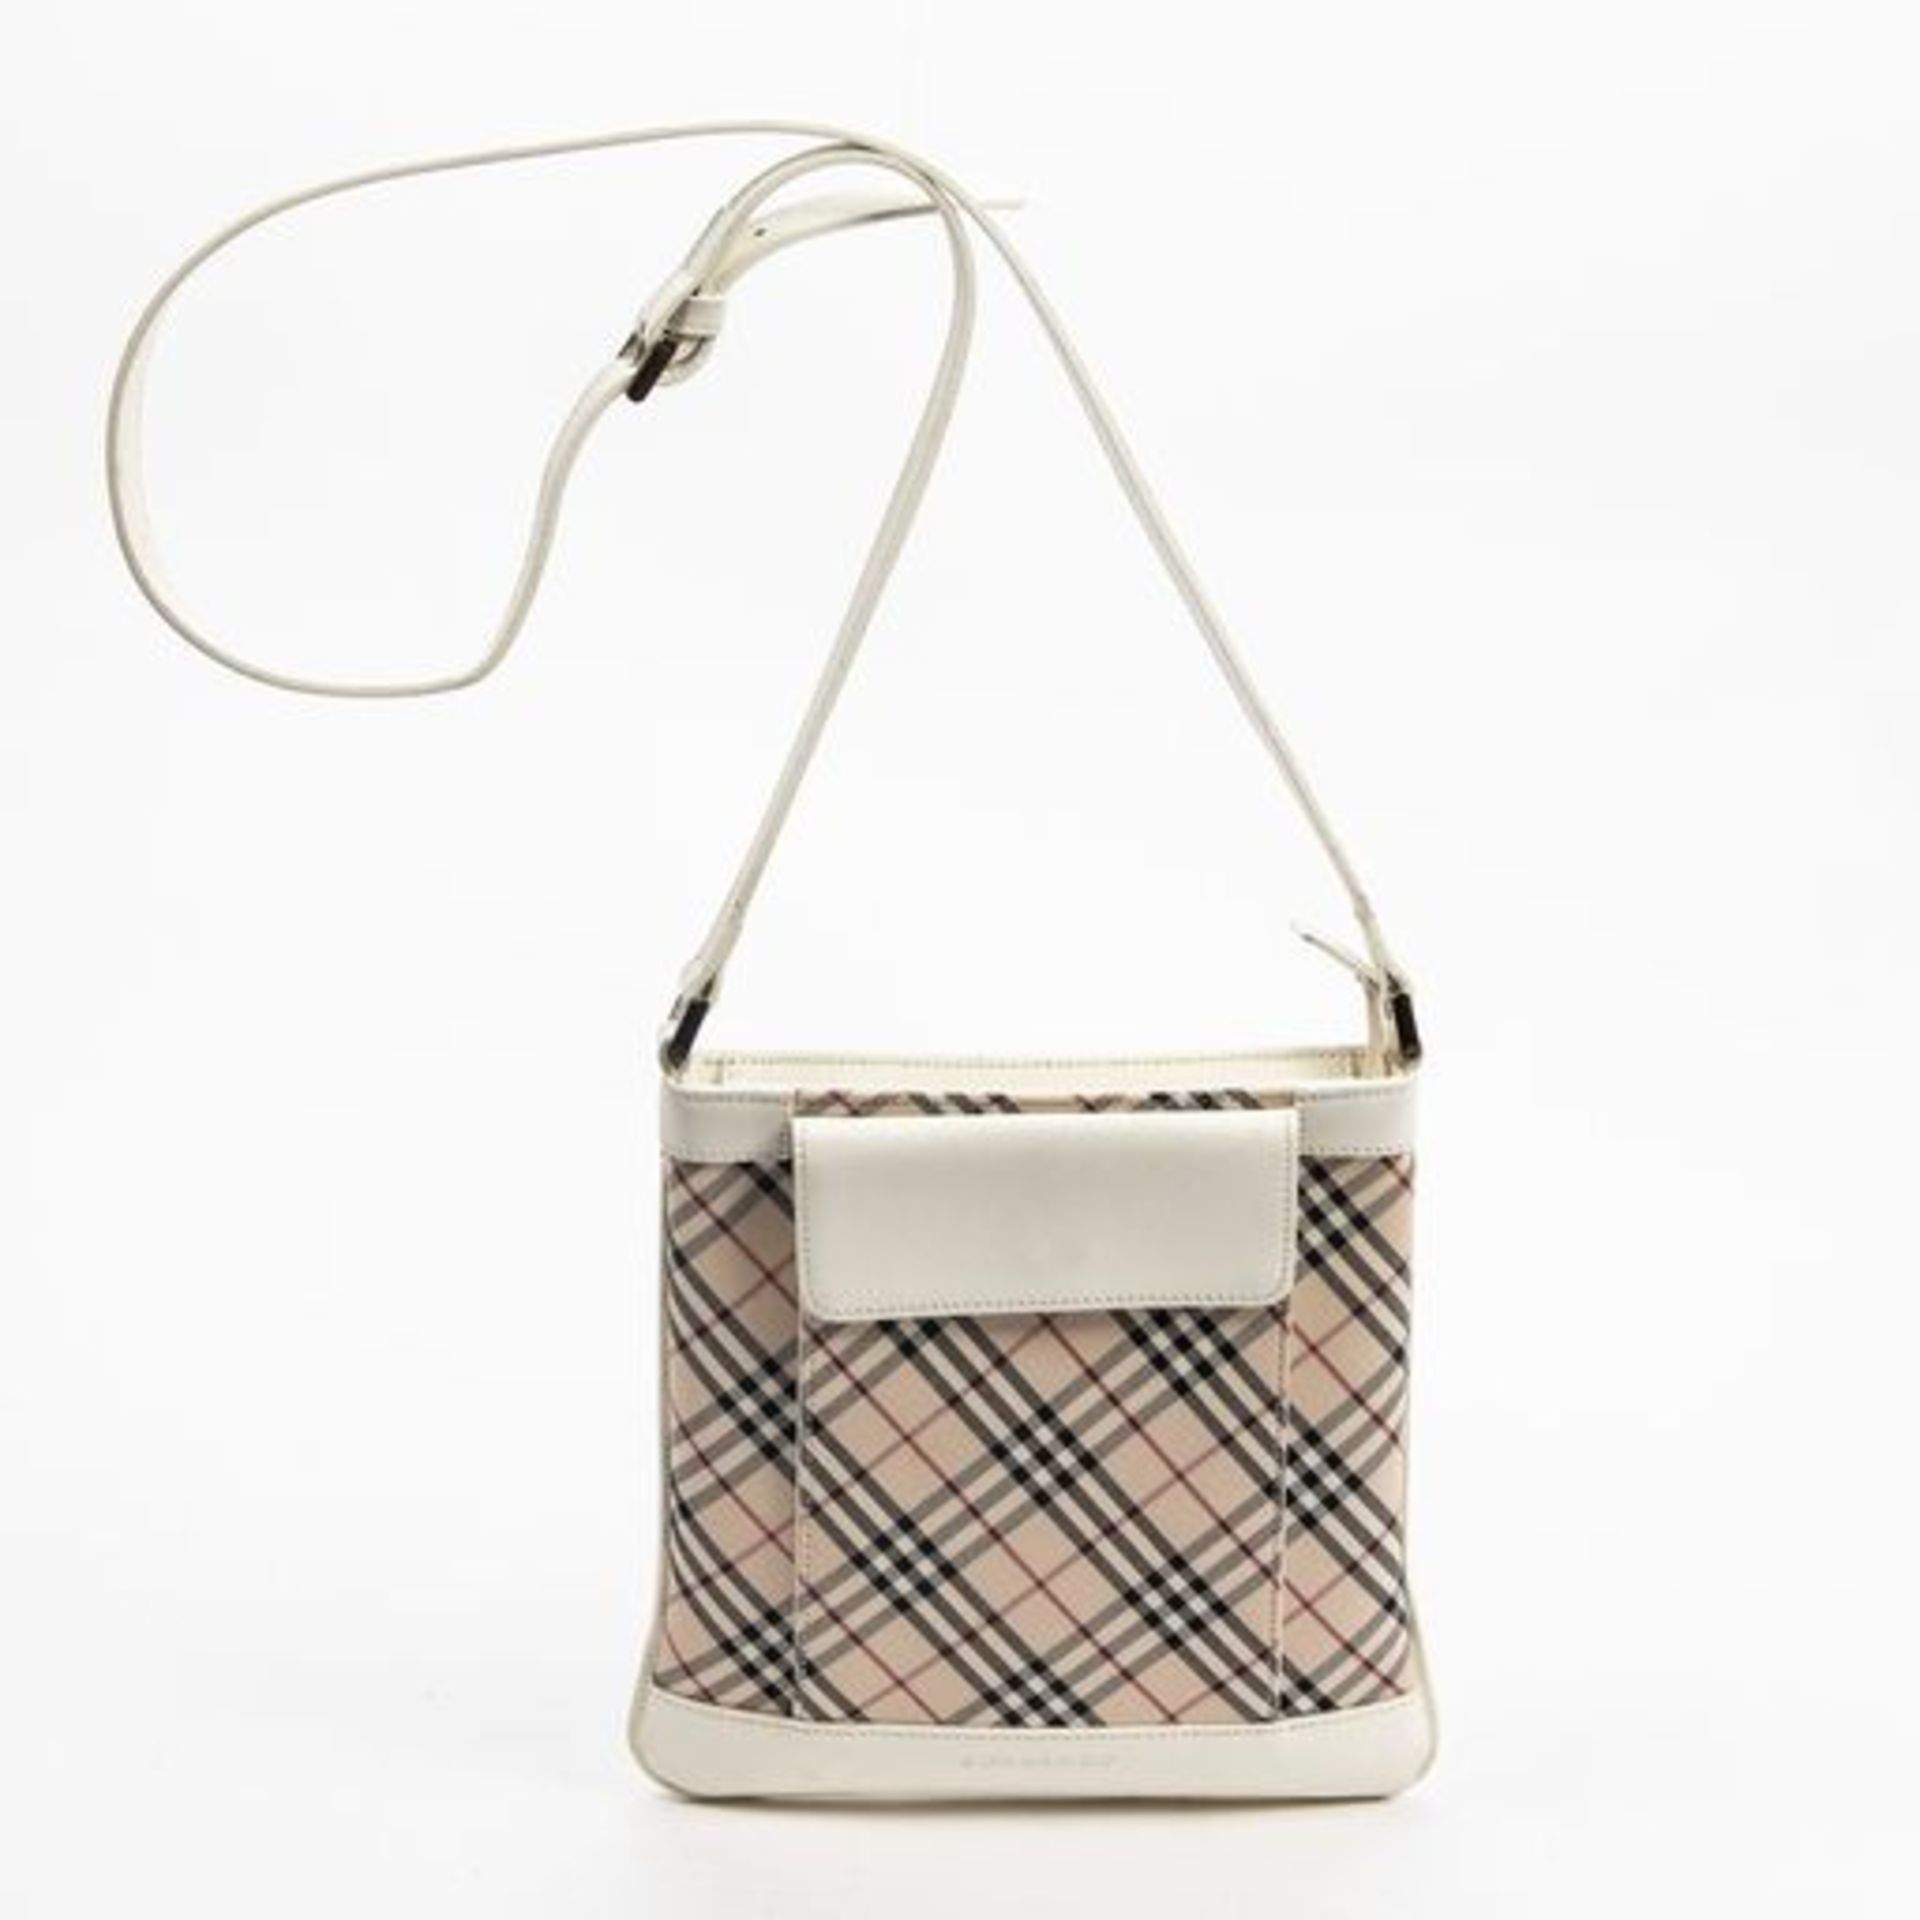 RRP £475.00 Lot To Contain 1 Burberry Canvas Front Pocket Small Crossbody Shoulder Bag In Beige/